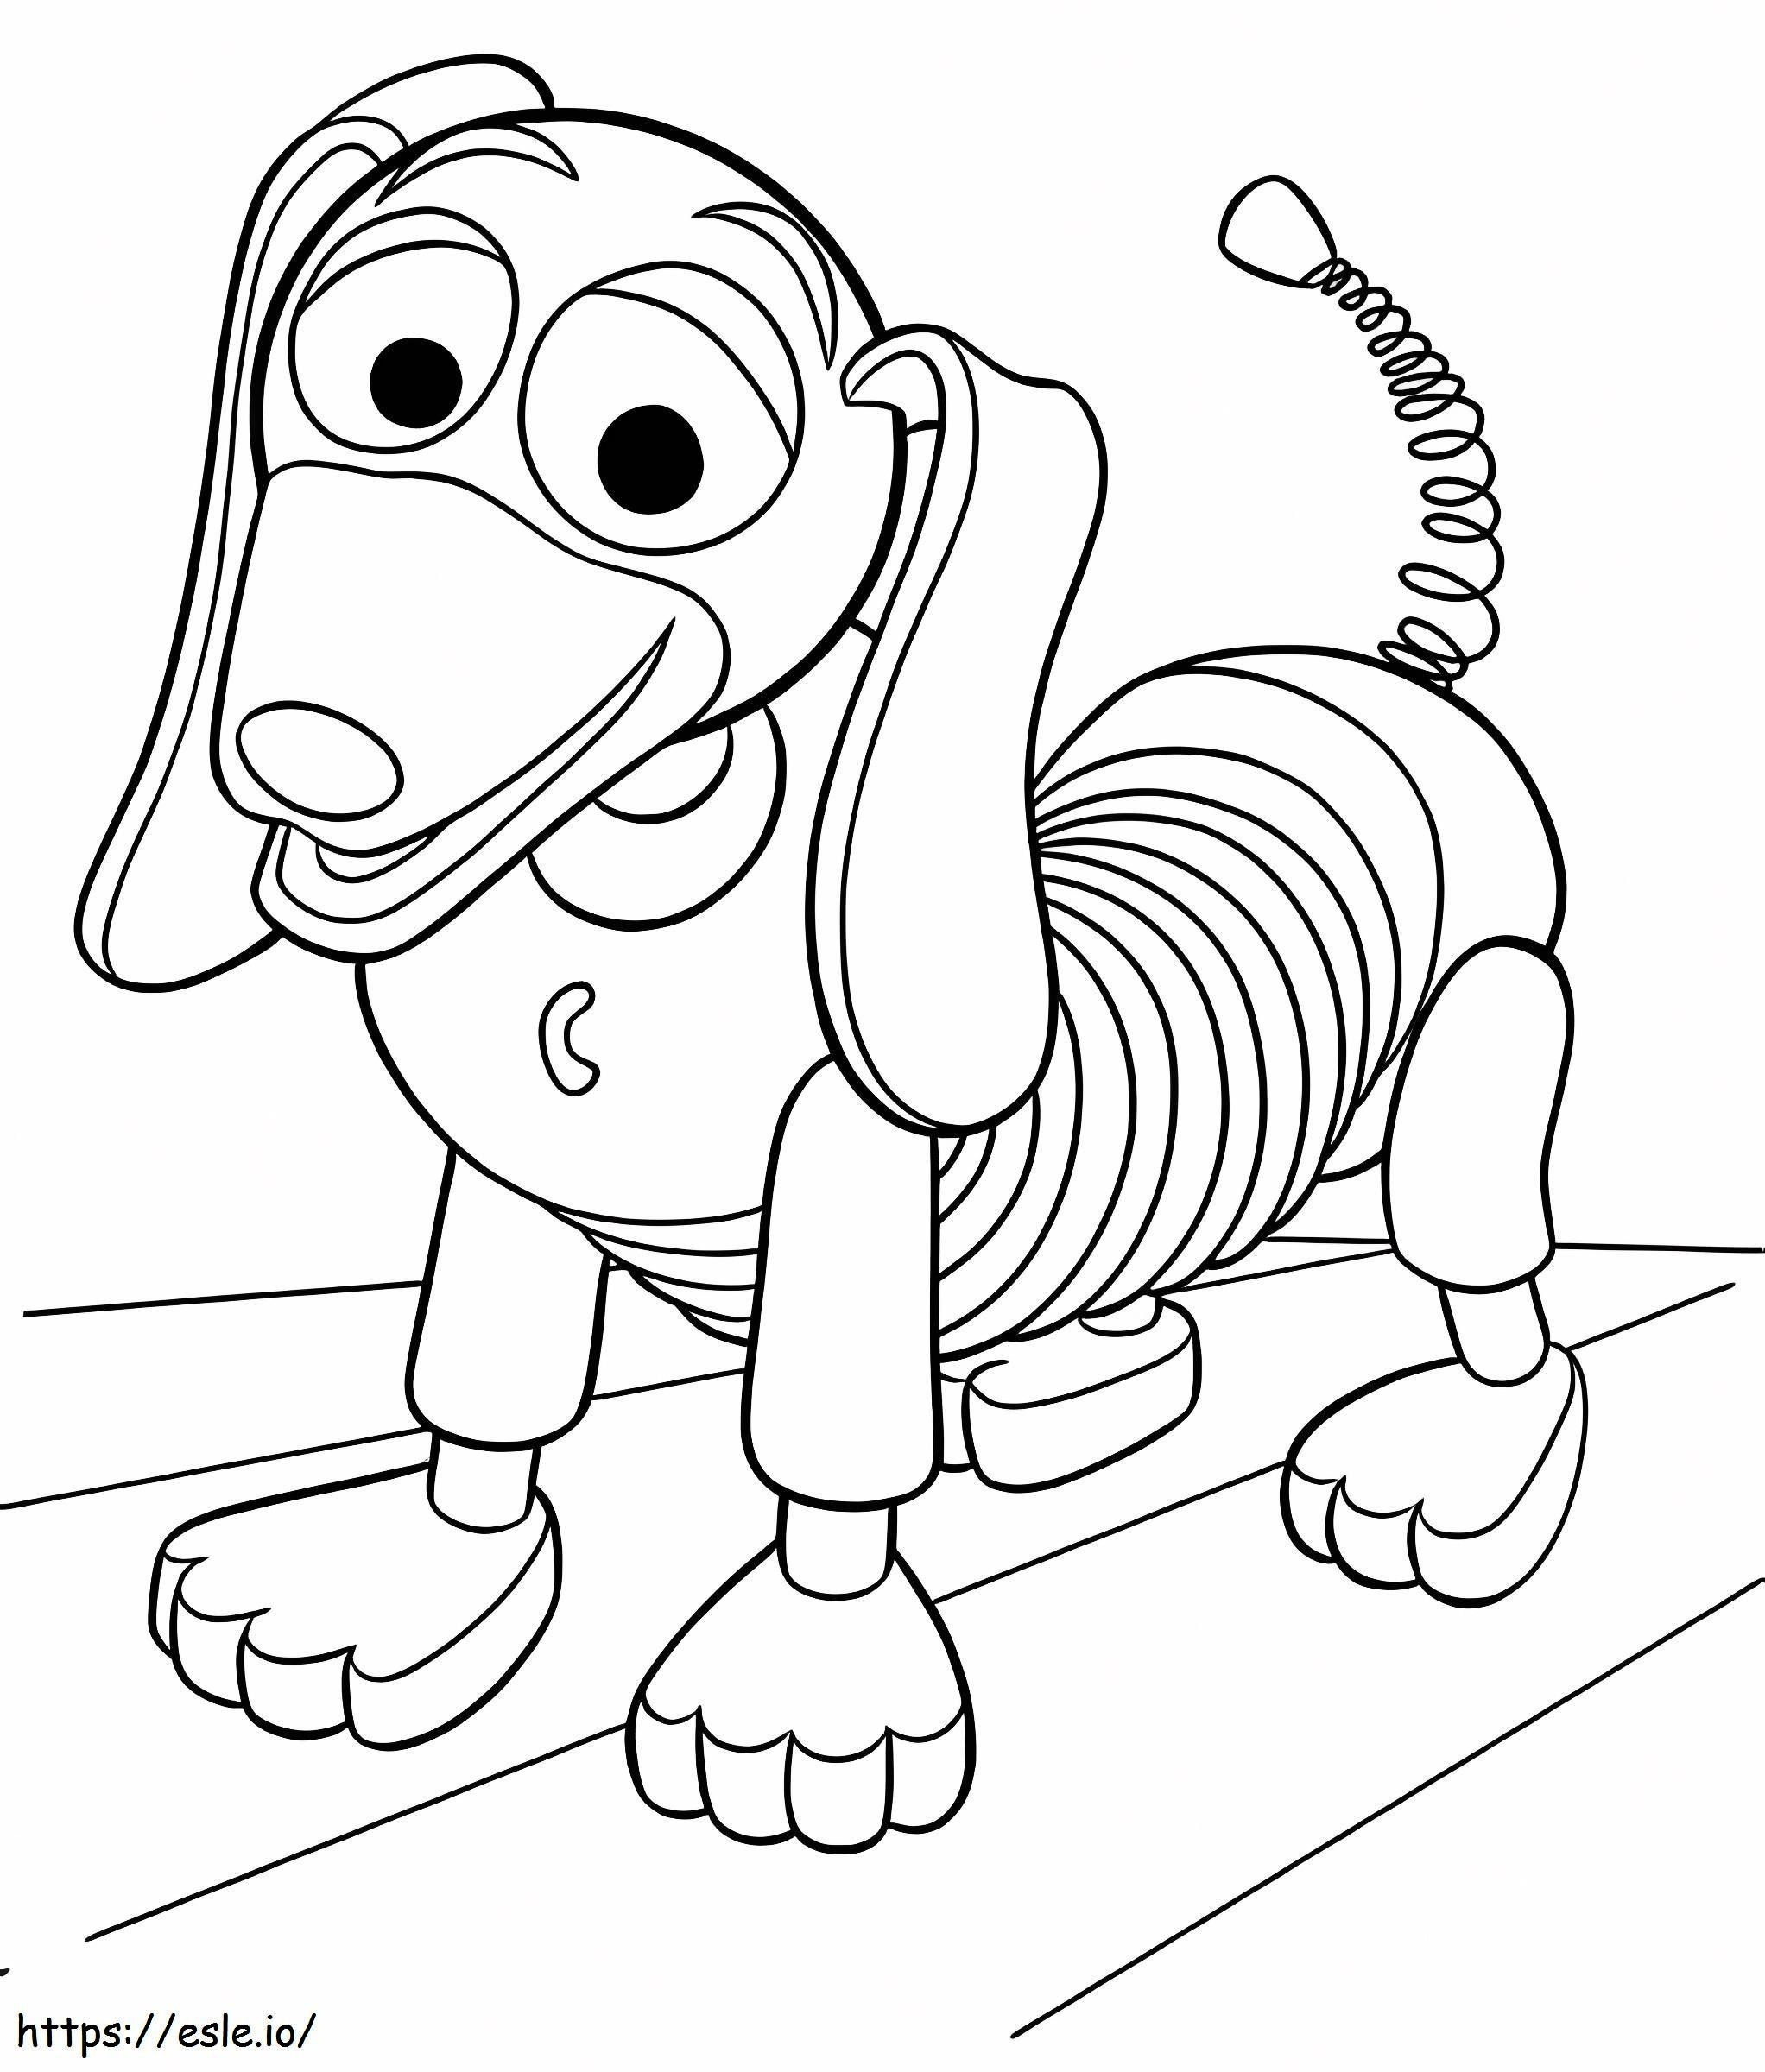 Dog Toy coloring page